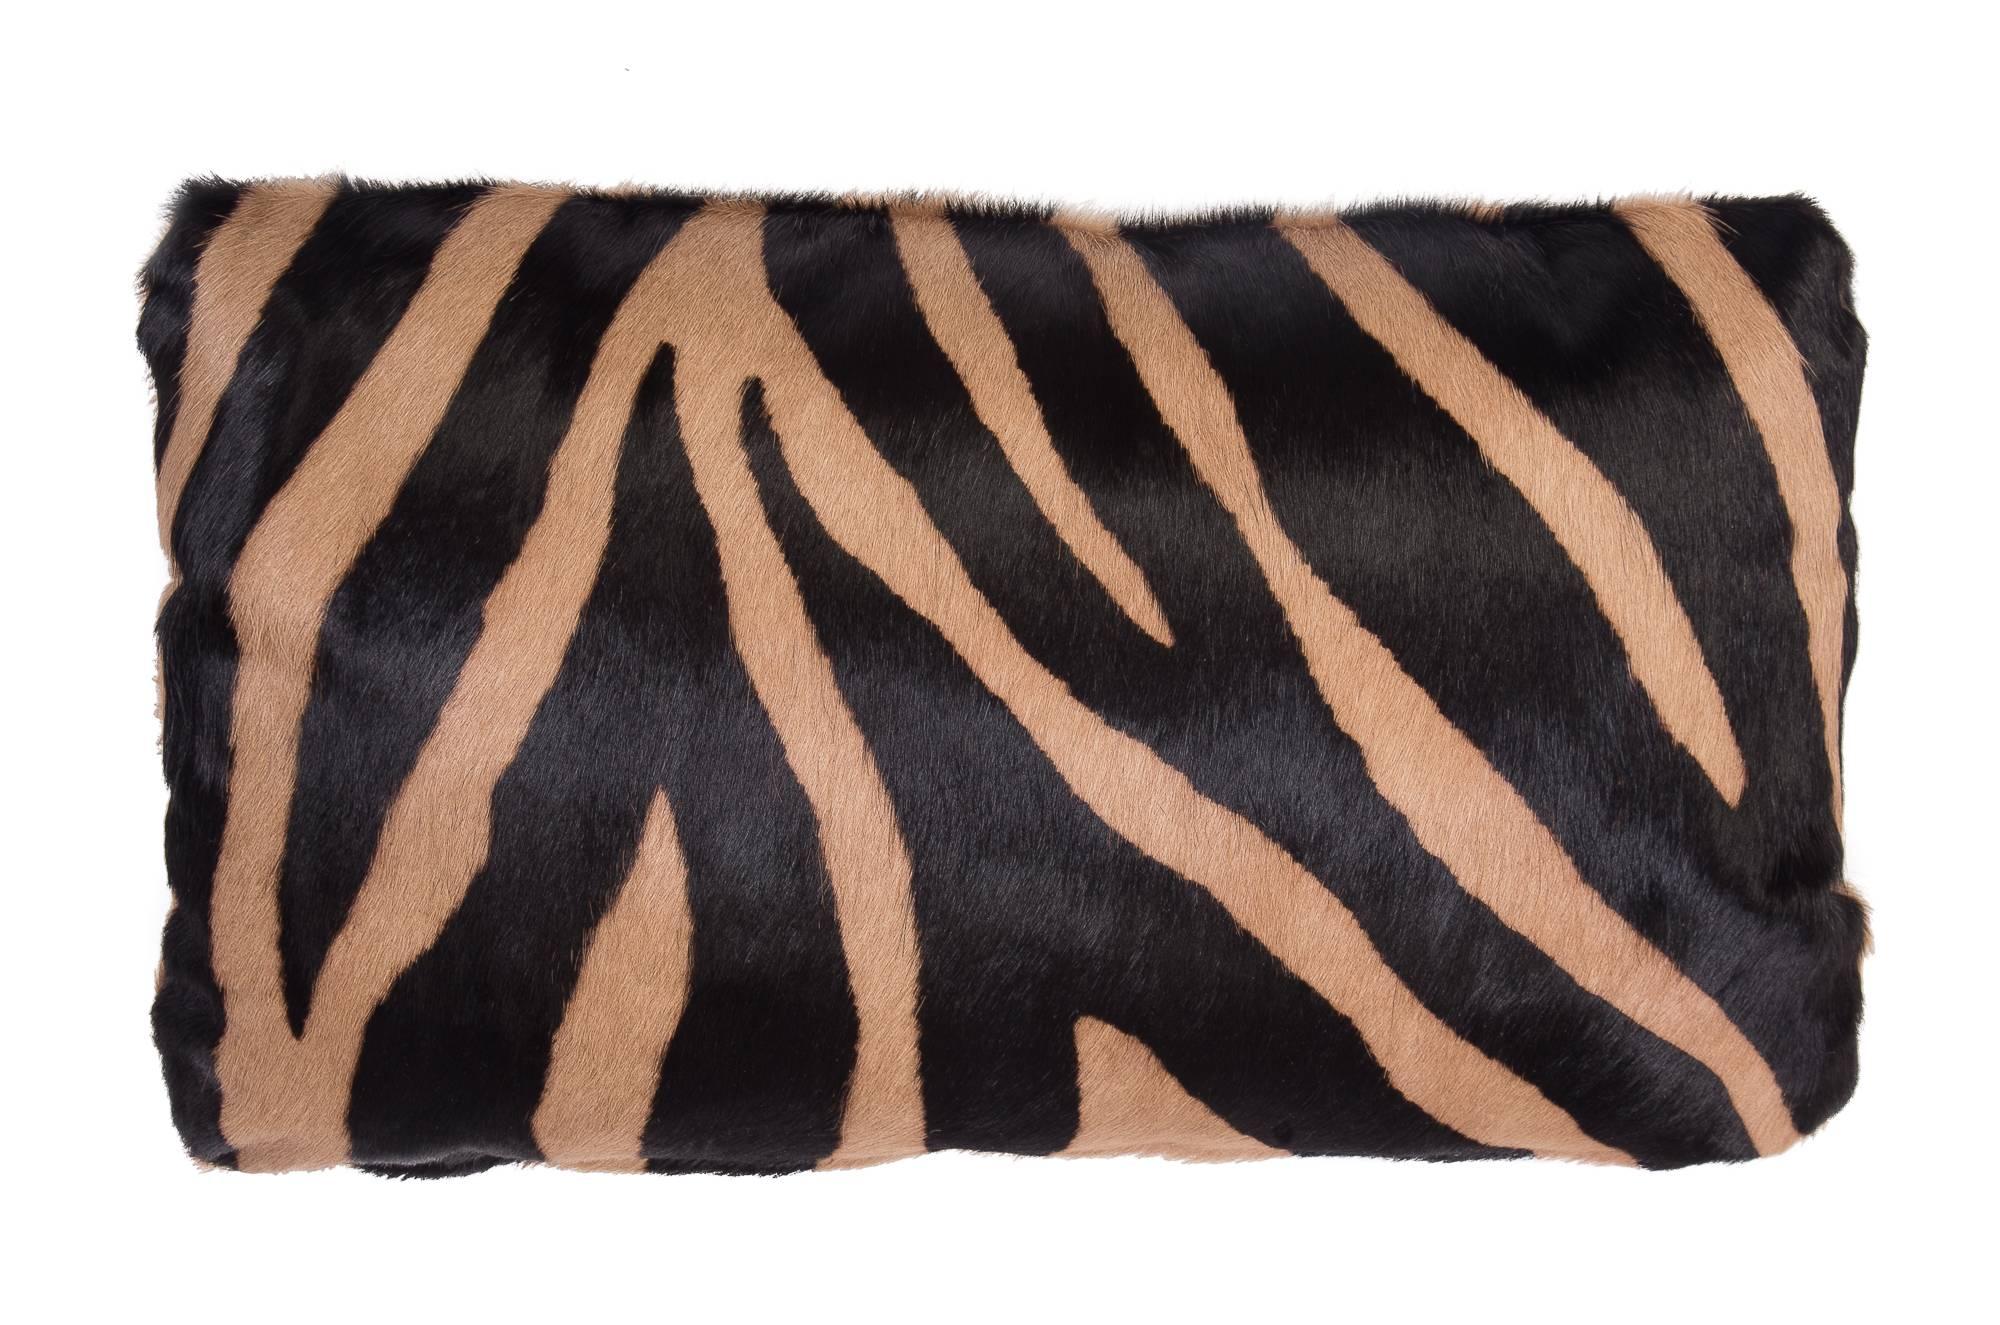 American Classical Contemporary Zebra Stencil Cowhide Hair Lumbar Pillow, 100% Feather Filled